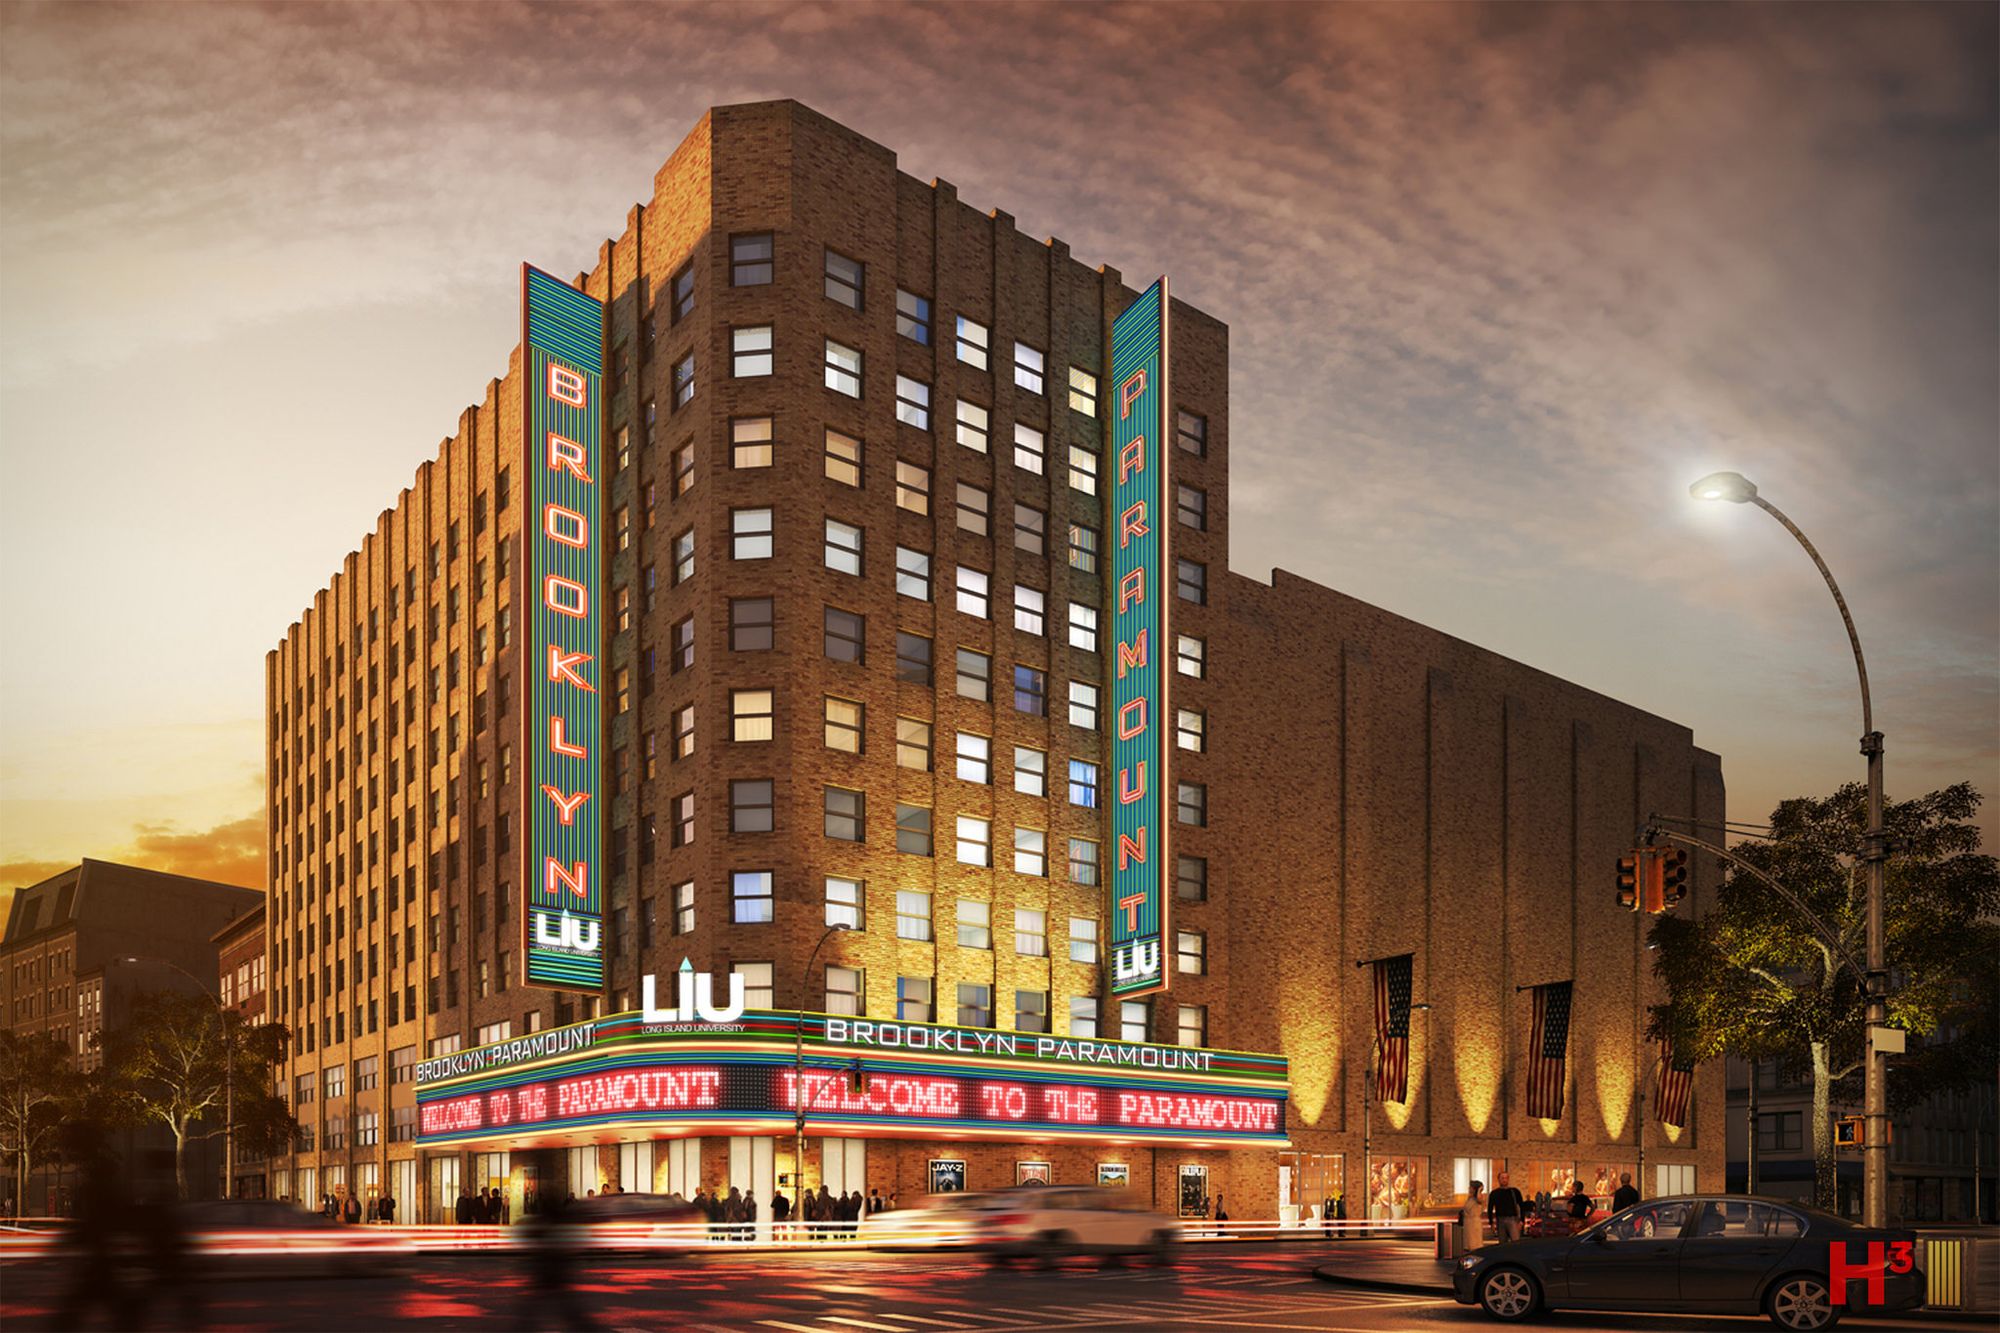 Peek At Renderings Of The Impending Historic Paramount Theater Restoration